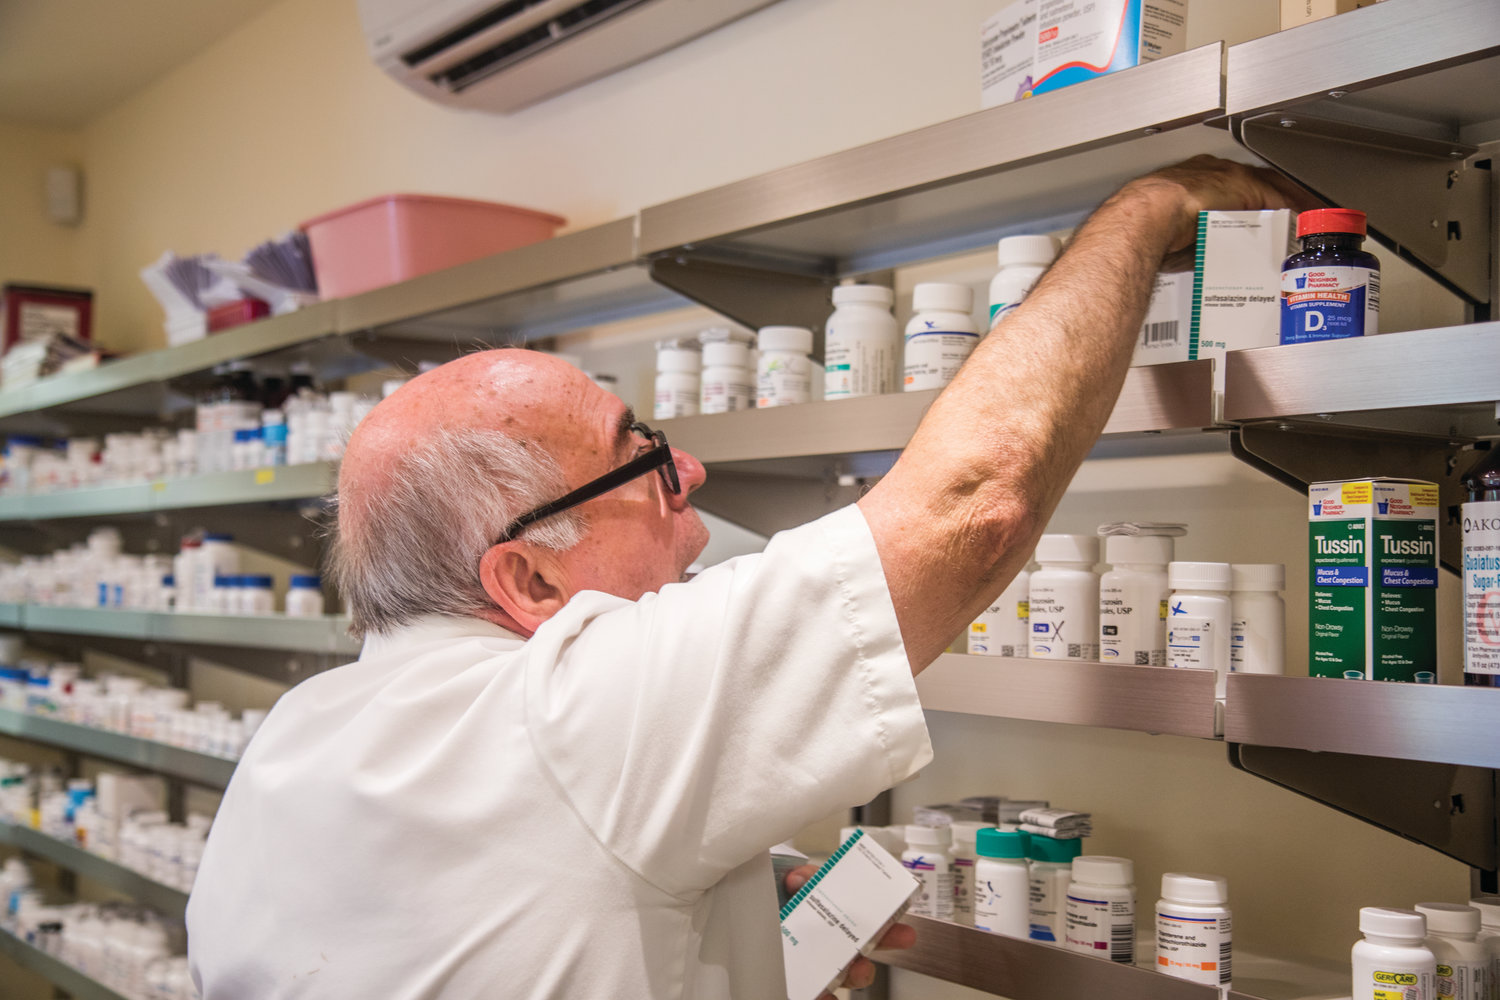 At the new pharmacy in Port Ludlow, pharmacist Normand Richard is able to see patients in southern Jefferson County who might not want to drive up to Port Townsend or Port Hadlock to pick up medications.